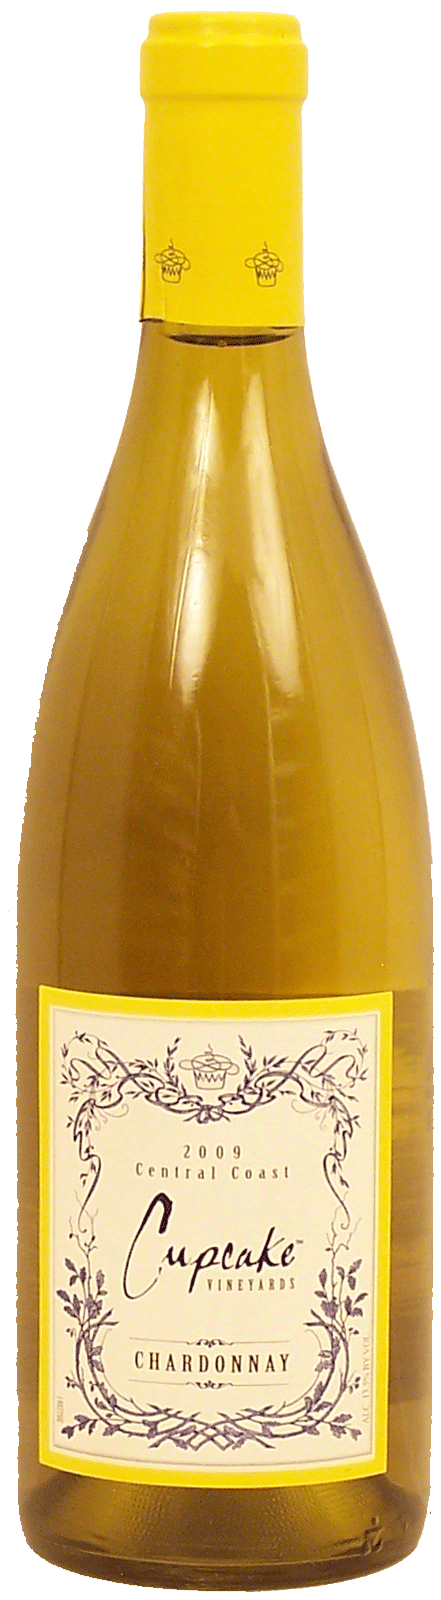 Cupcake Vineyards  chardonnay wine of Central Coast, 13.5% alc. by vol. Full-Size Picture